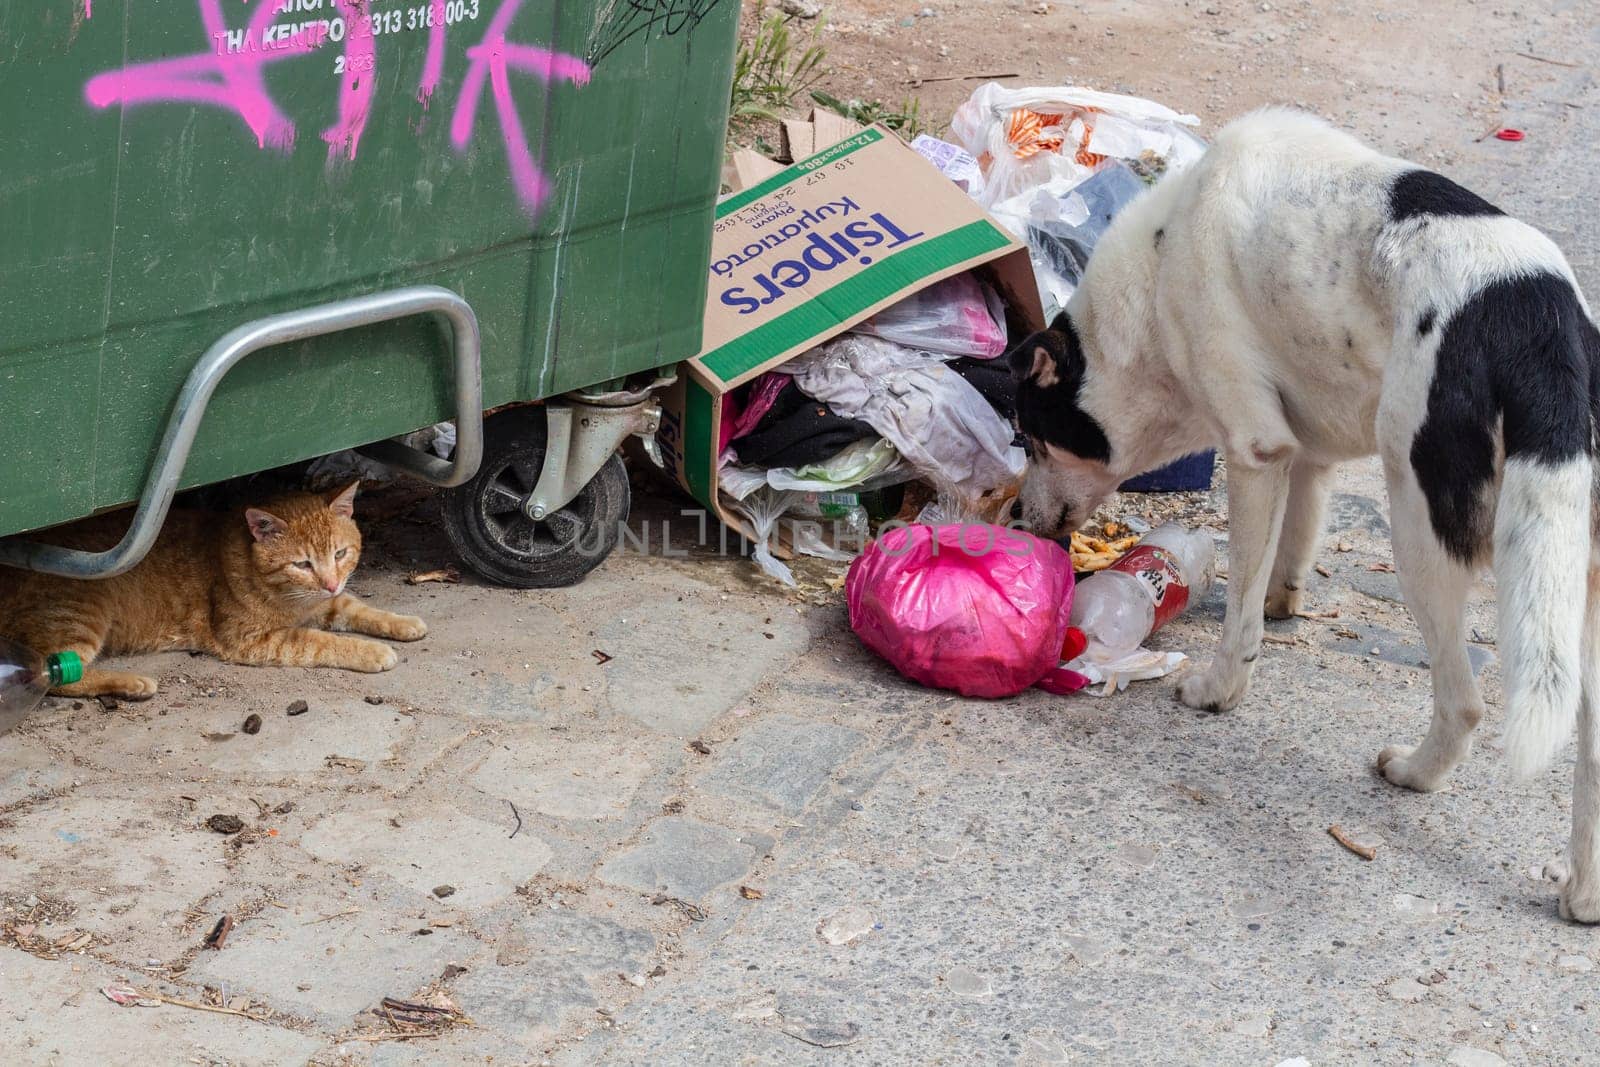 Resilience and Compassion in the Urban Jungle: Stray Dog Seeking Food Beside Trash Bin, Sheltered Cat Finding Solace - Animal Welfare Amidst Adversity by DakotaBOldeman